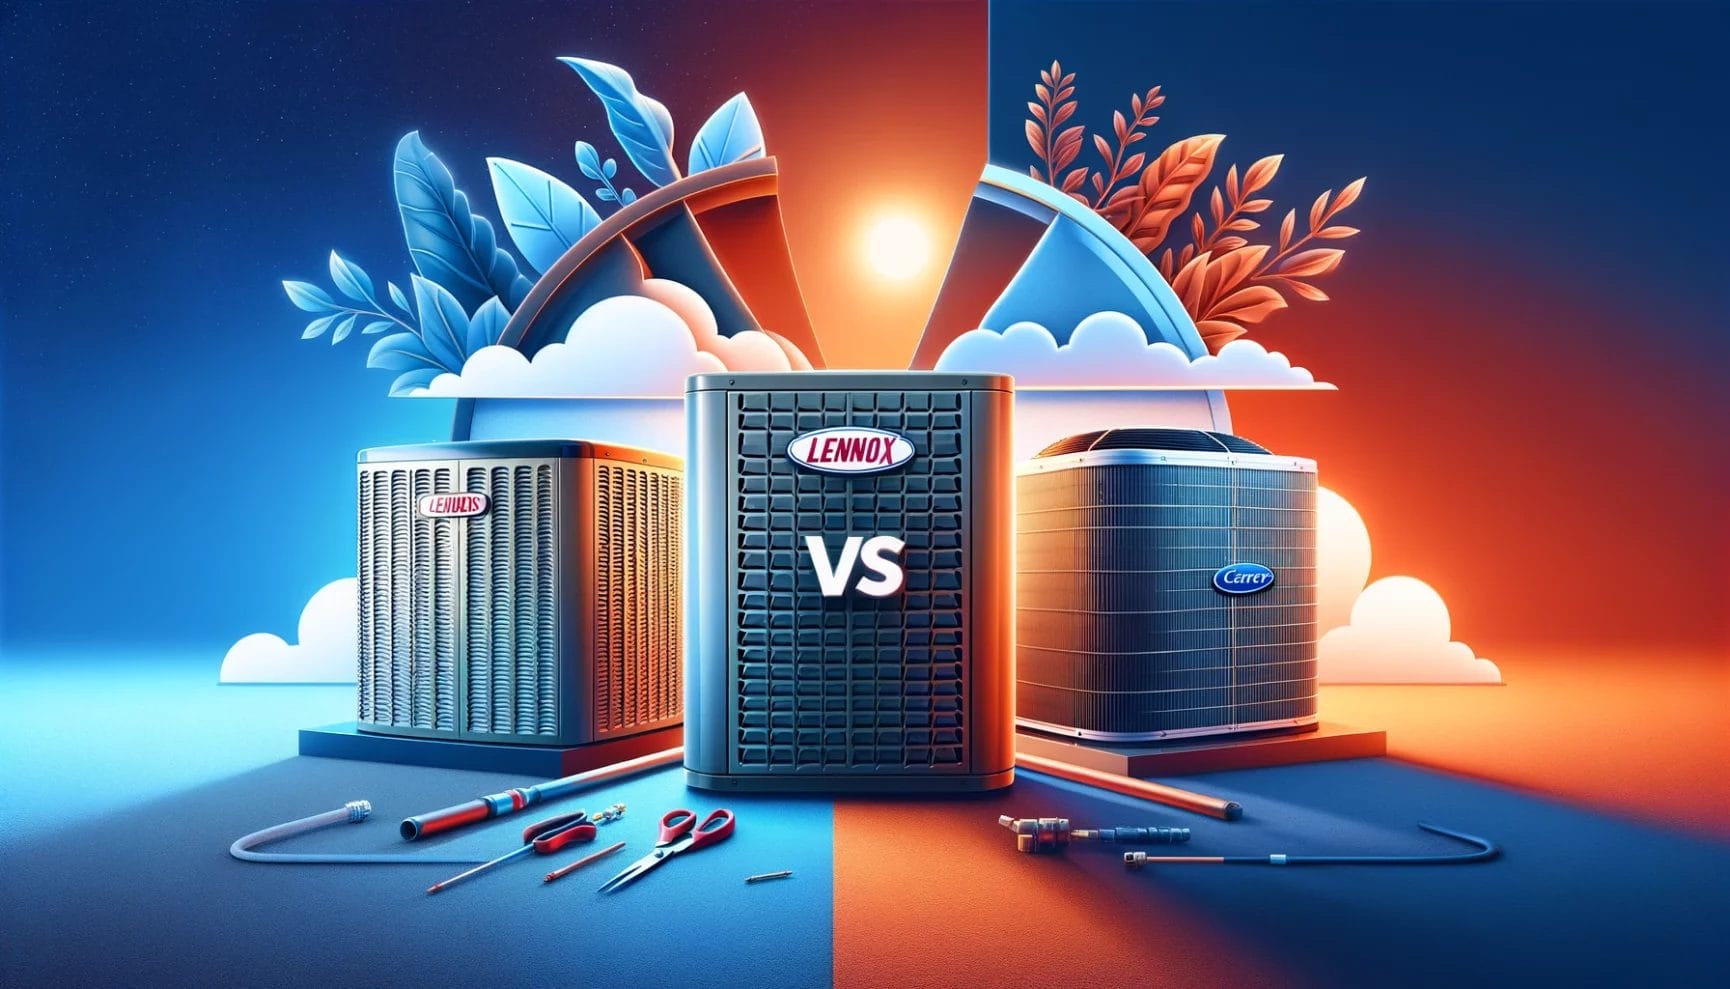 Stylized illustration of a comparison between lennox and carrier air conditioning units with tools in the foreground against a sunset backdrop.